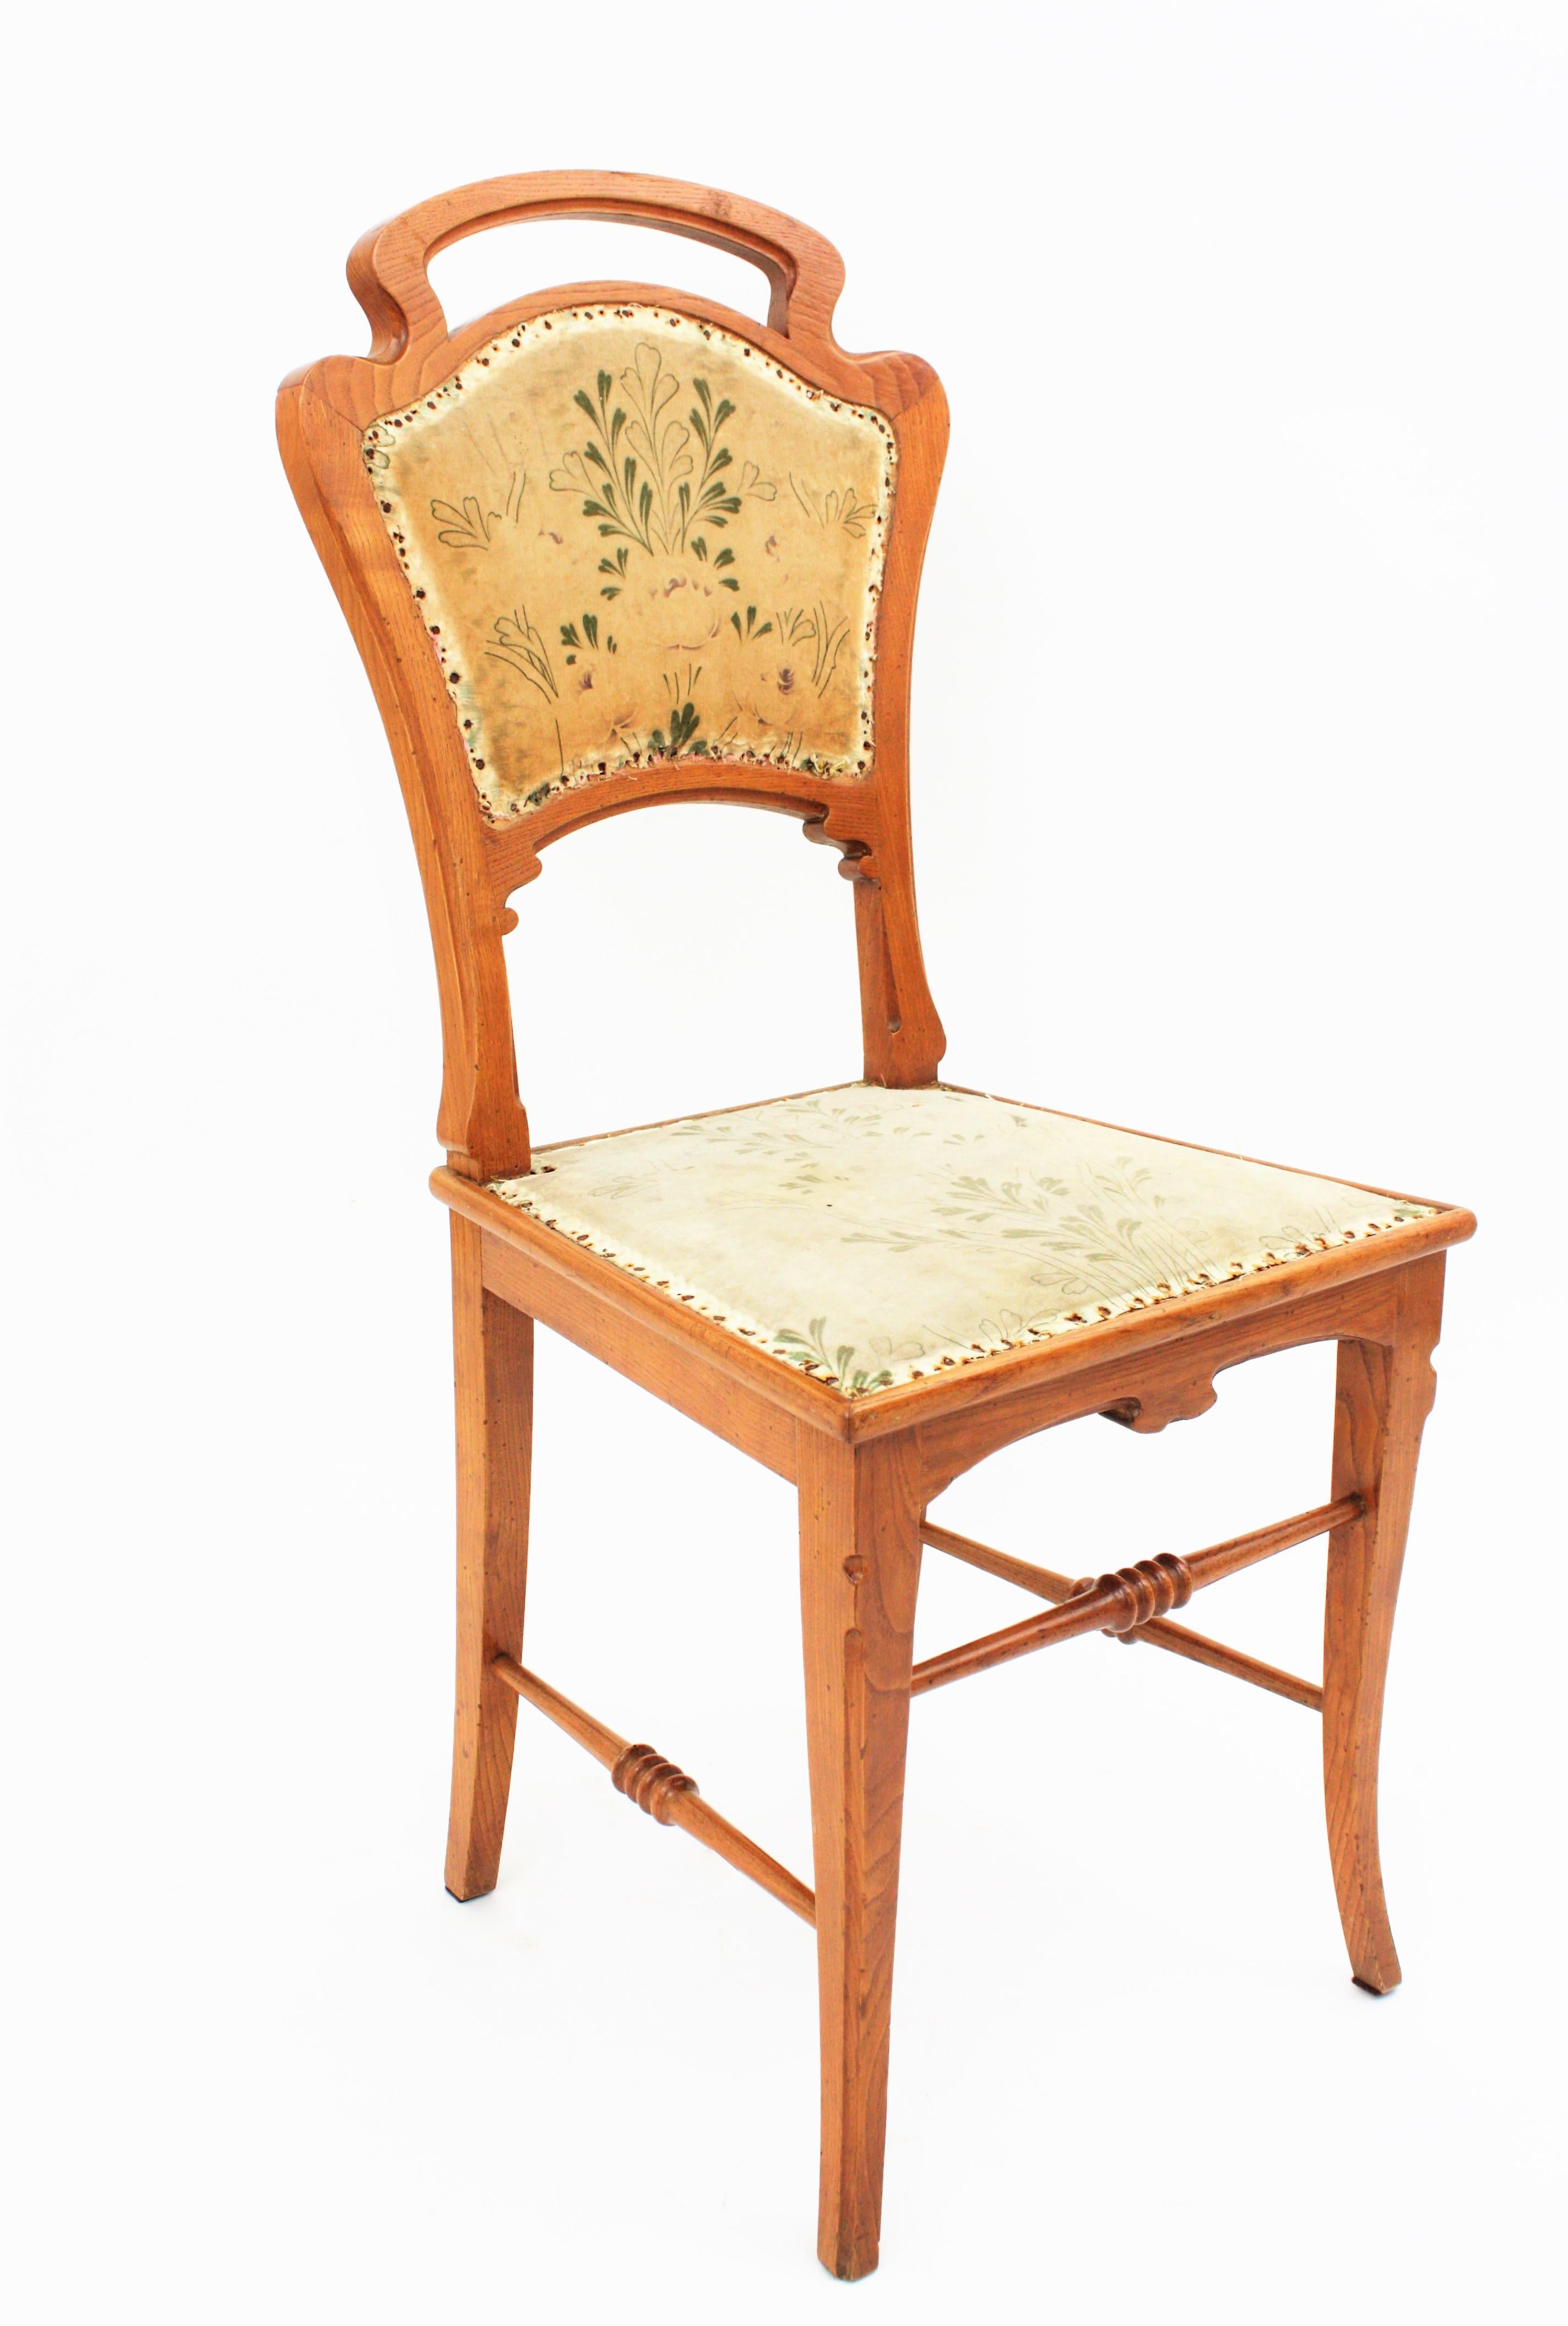 20th Century Spanish Art Nouveau Antoni Gaudi Style Pair of Carved Ashwood Side Chairs For Sale